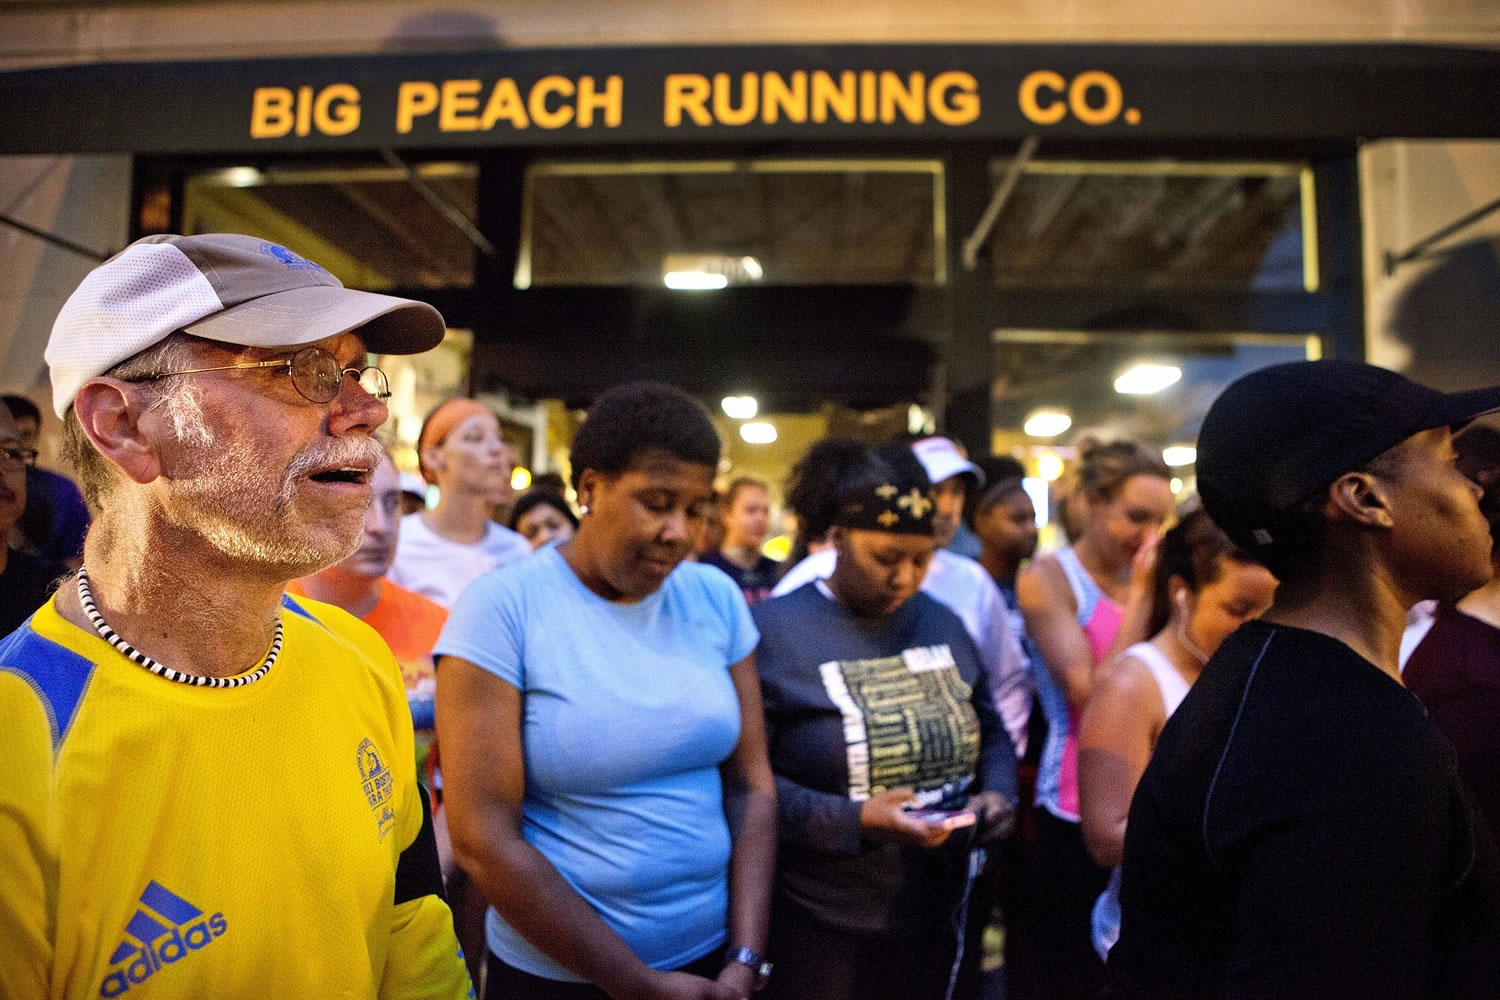 John Tackett of Atlanta, left, weeps during an organized moment of silence and memorial run to show solidarity with victims of the Boston Marathon bombing on Tuesday in Atlanta.